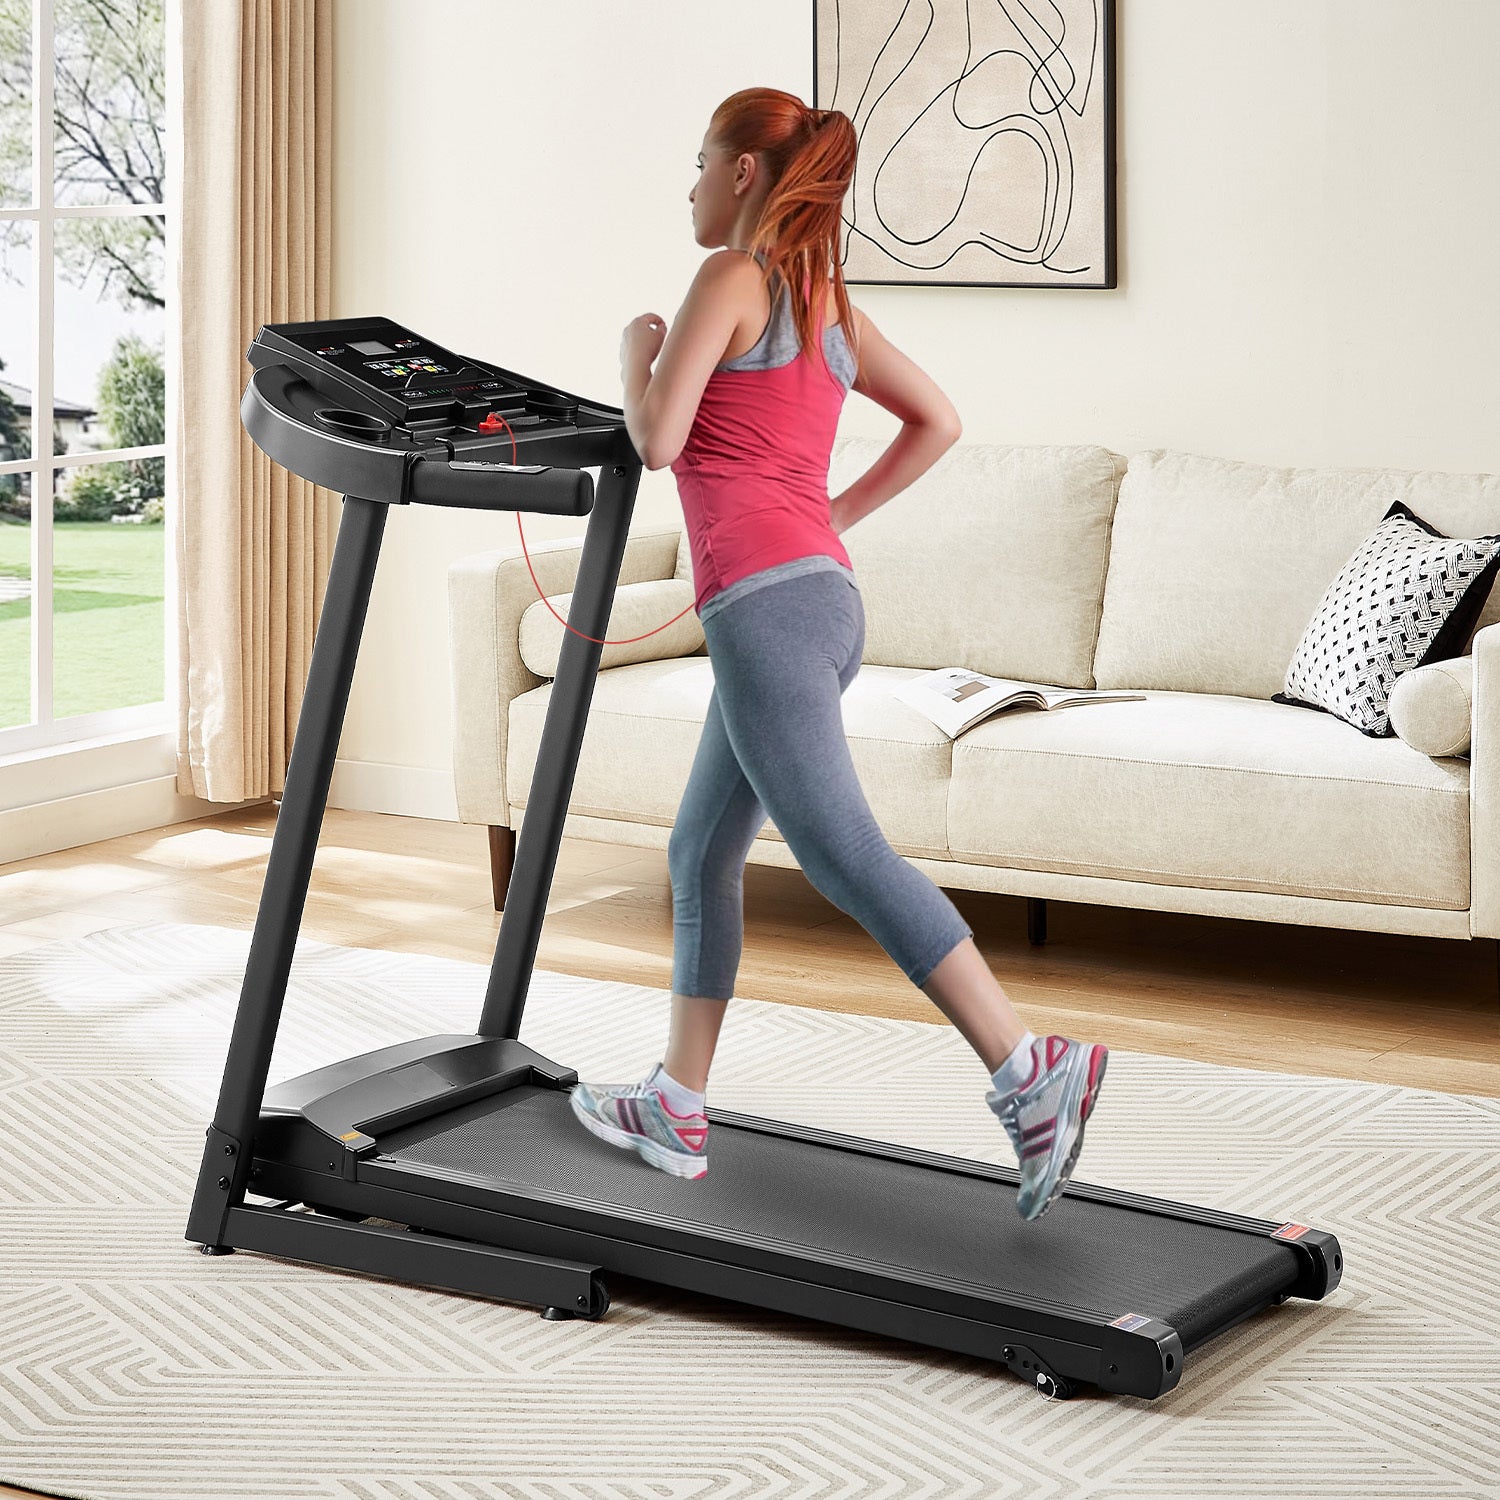 Treadmills - 2.5 HP hydraulic folding removable treadmill with 3-speed incline adjustment, 12 preset programs, 3 countdown modes, heart rate, bluetooth and more, suitable for home and gym use - Tonkn